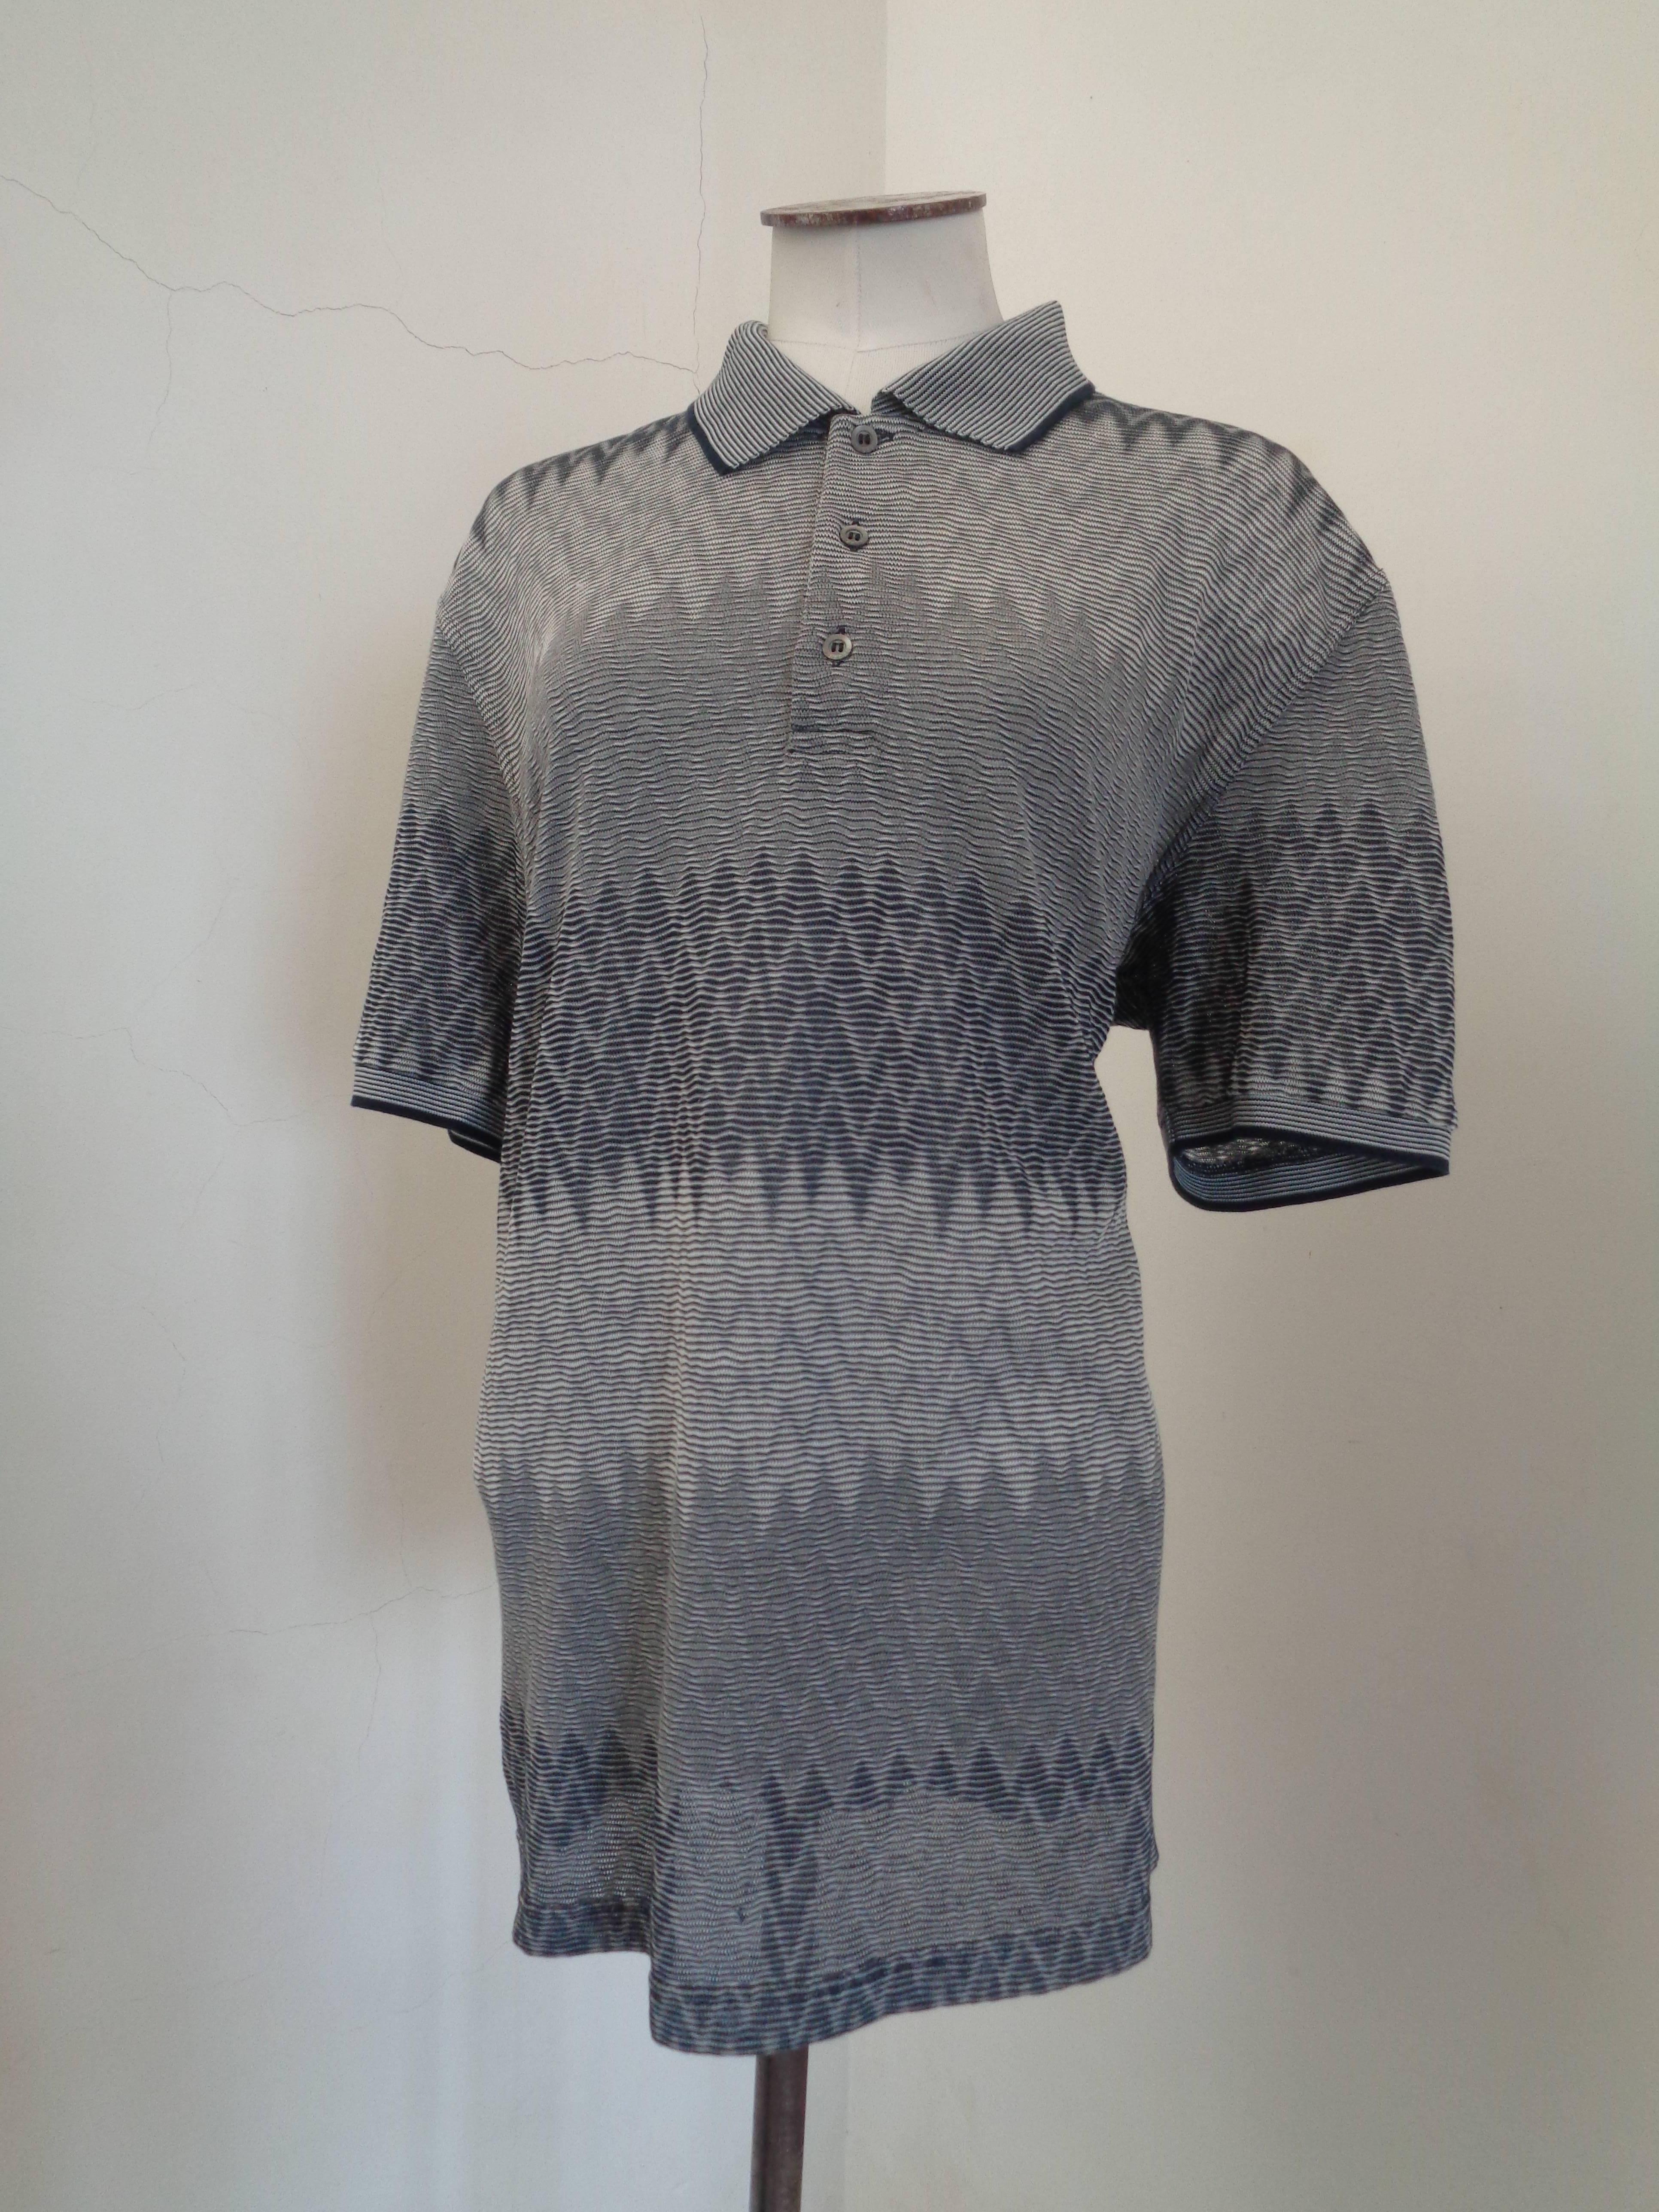 Missoni Grey Cotton Shirt
Totally made in italy